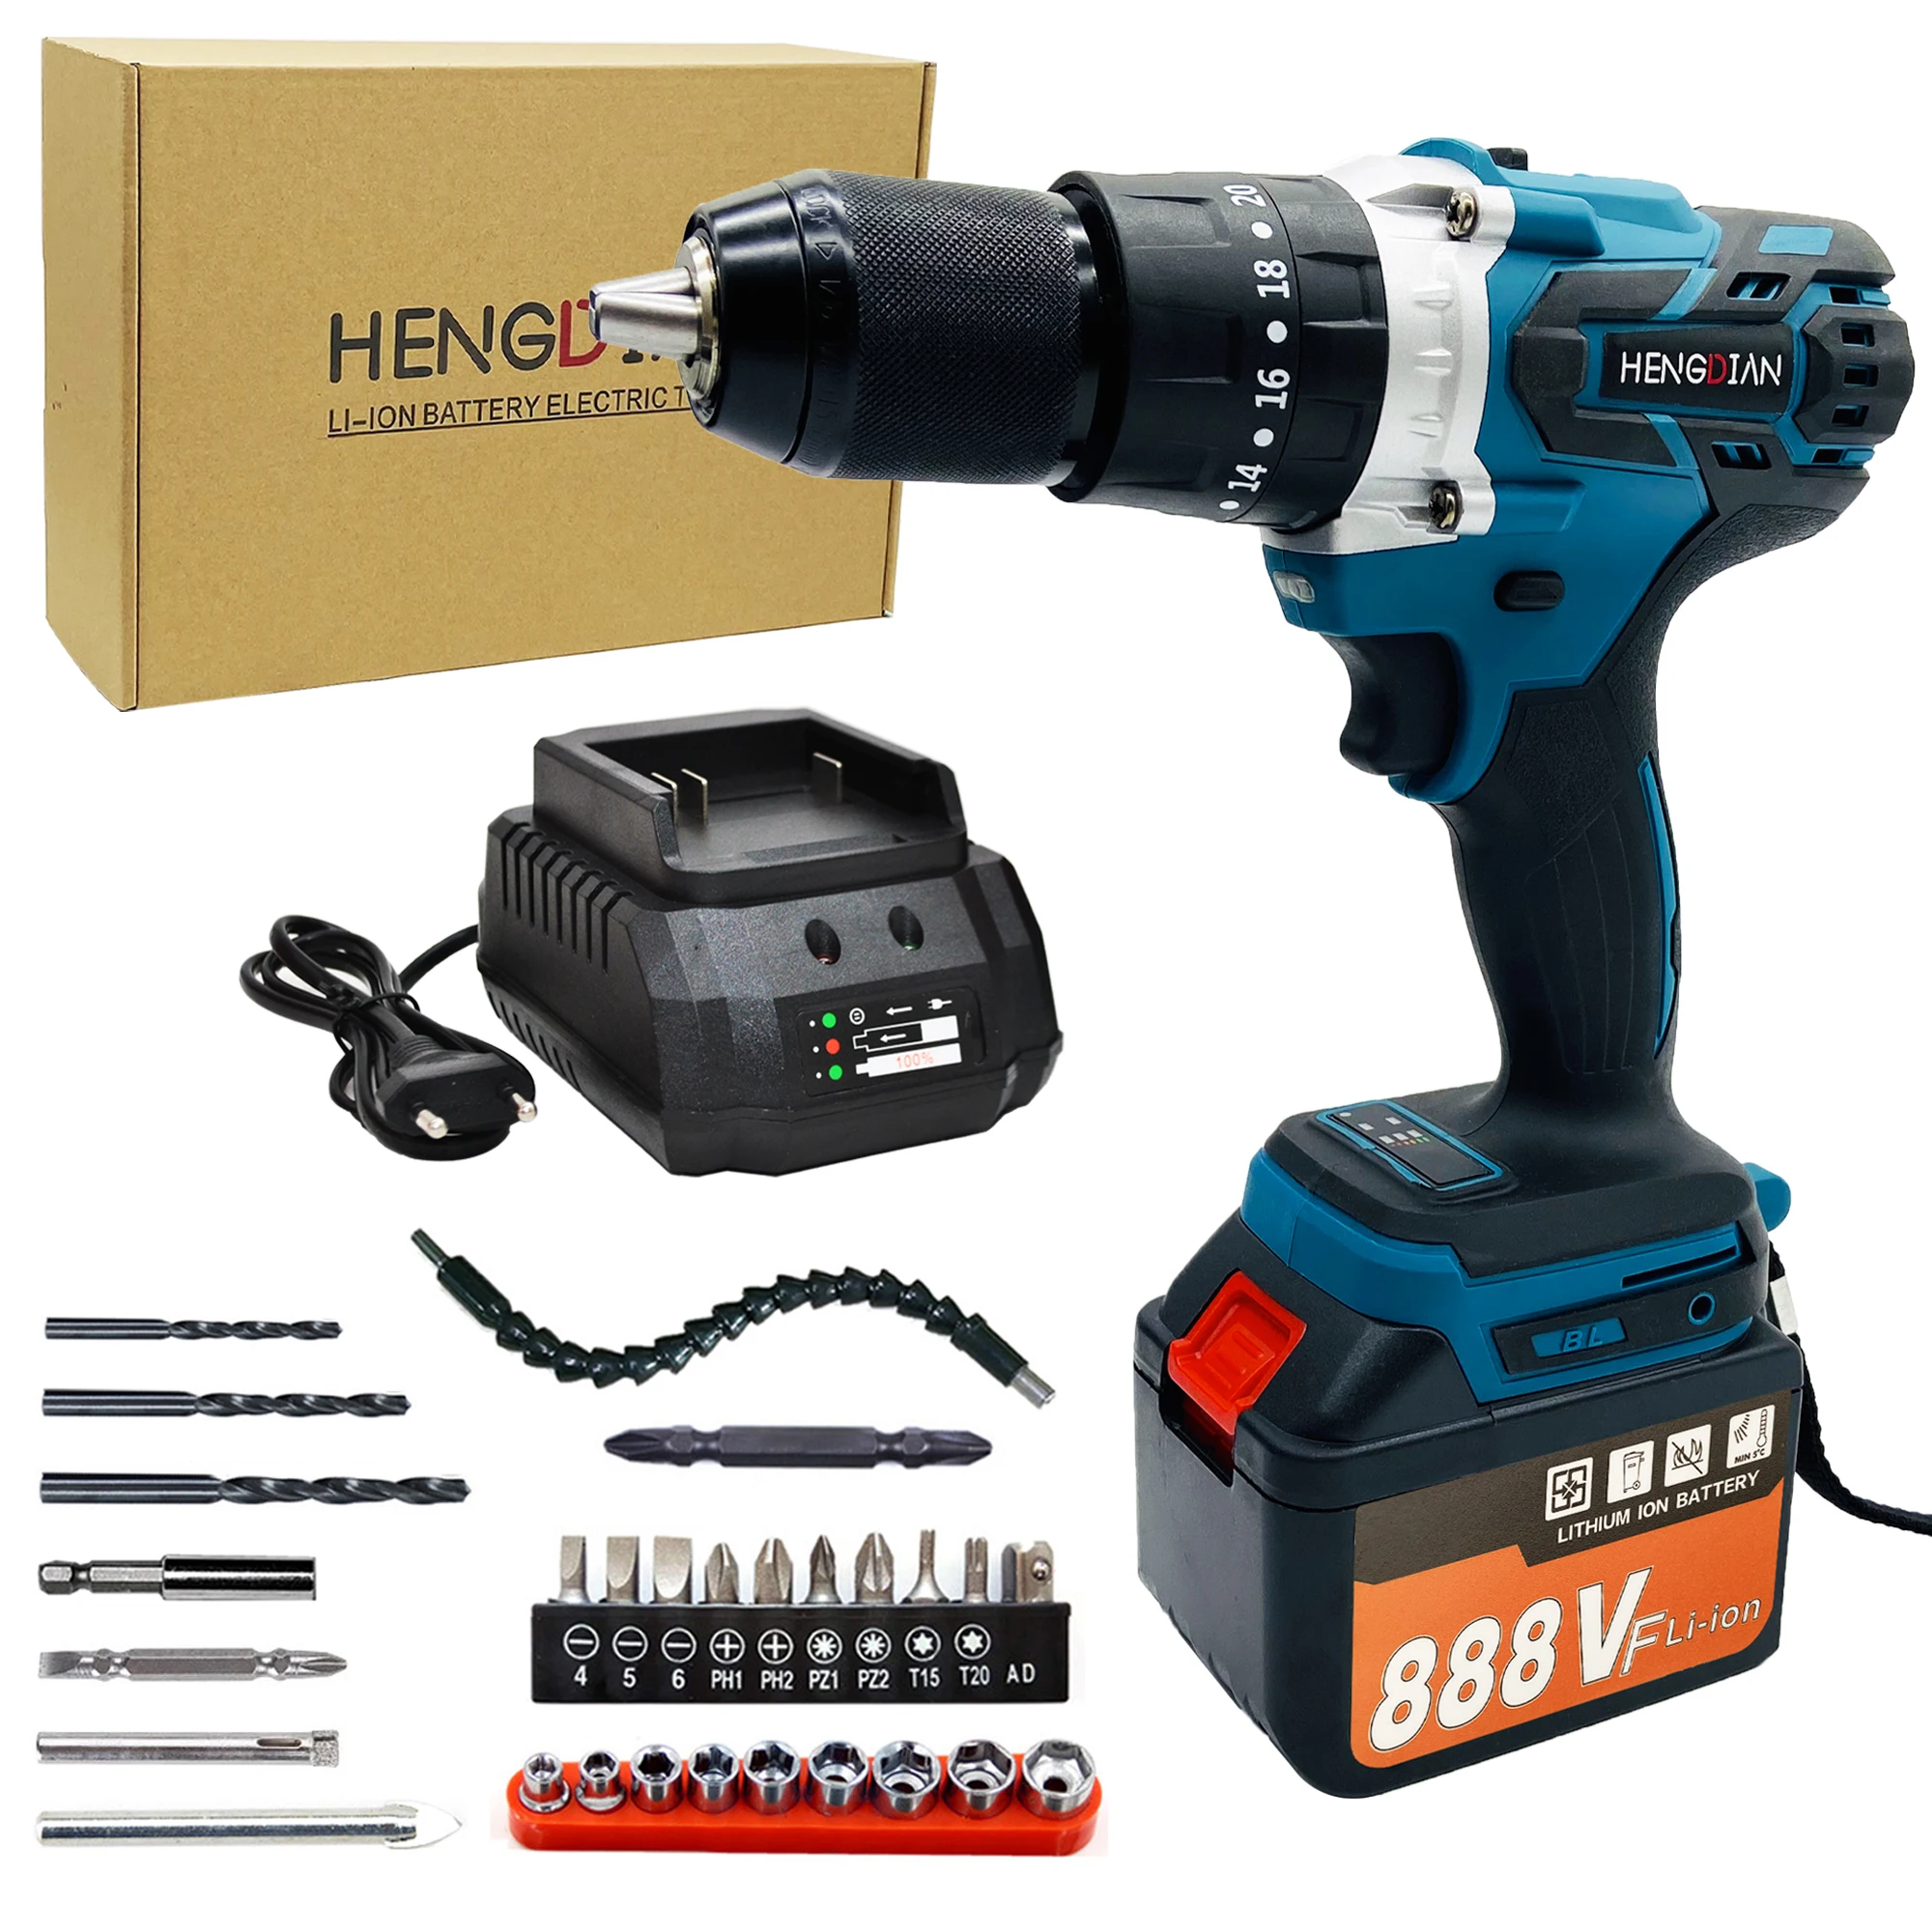 20V Brushless Battery Screwdriver Craft Drill Set Adjustable Torque Machine Impact Cordless Power Tools Electric Drill electric goddess tw004g brushless and cordless impact electric screwdriver reusable drill machine suitable for makita battery